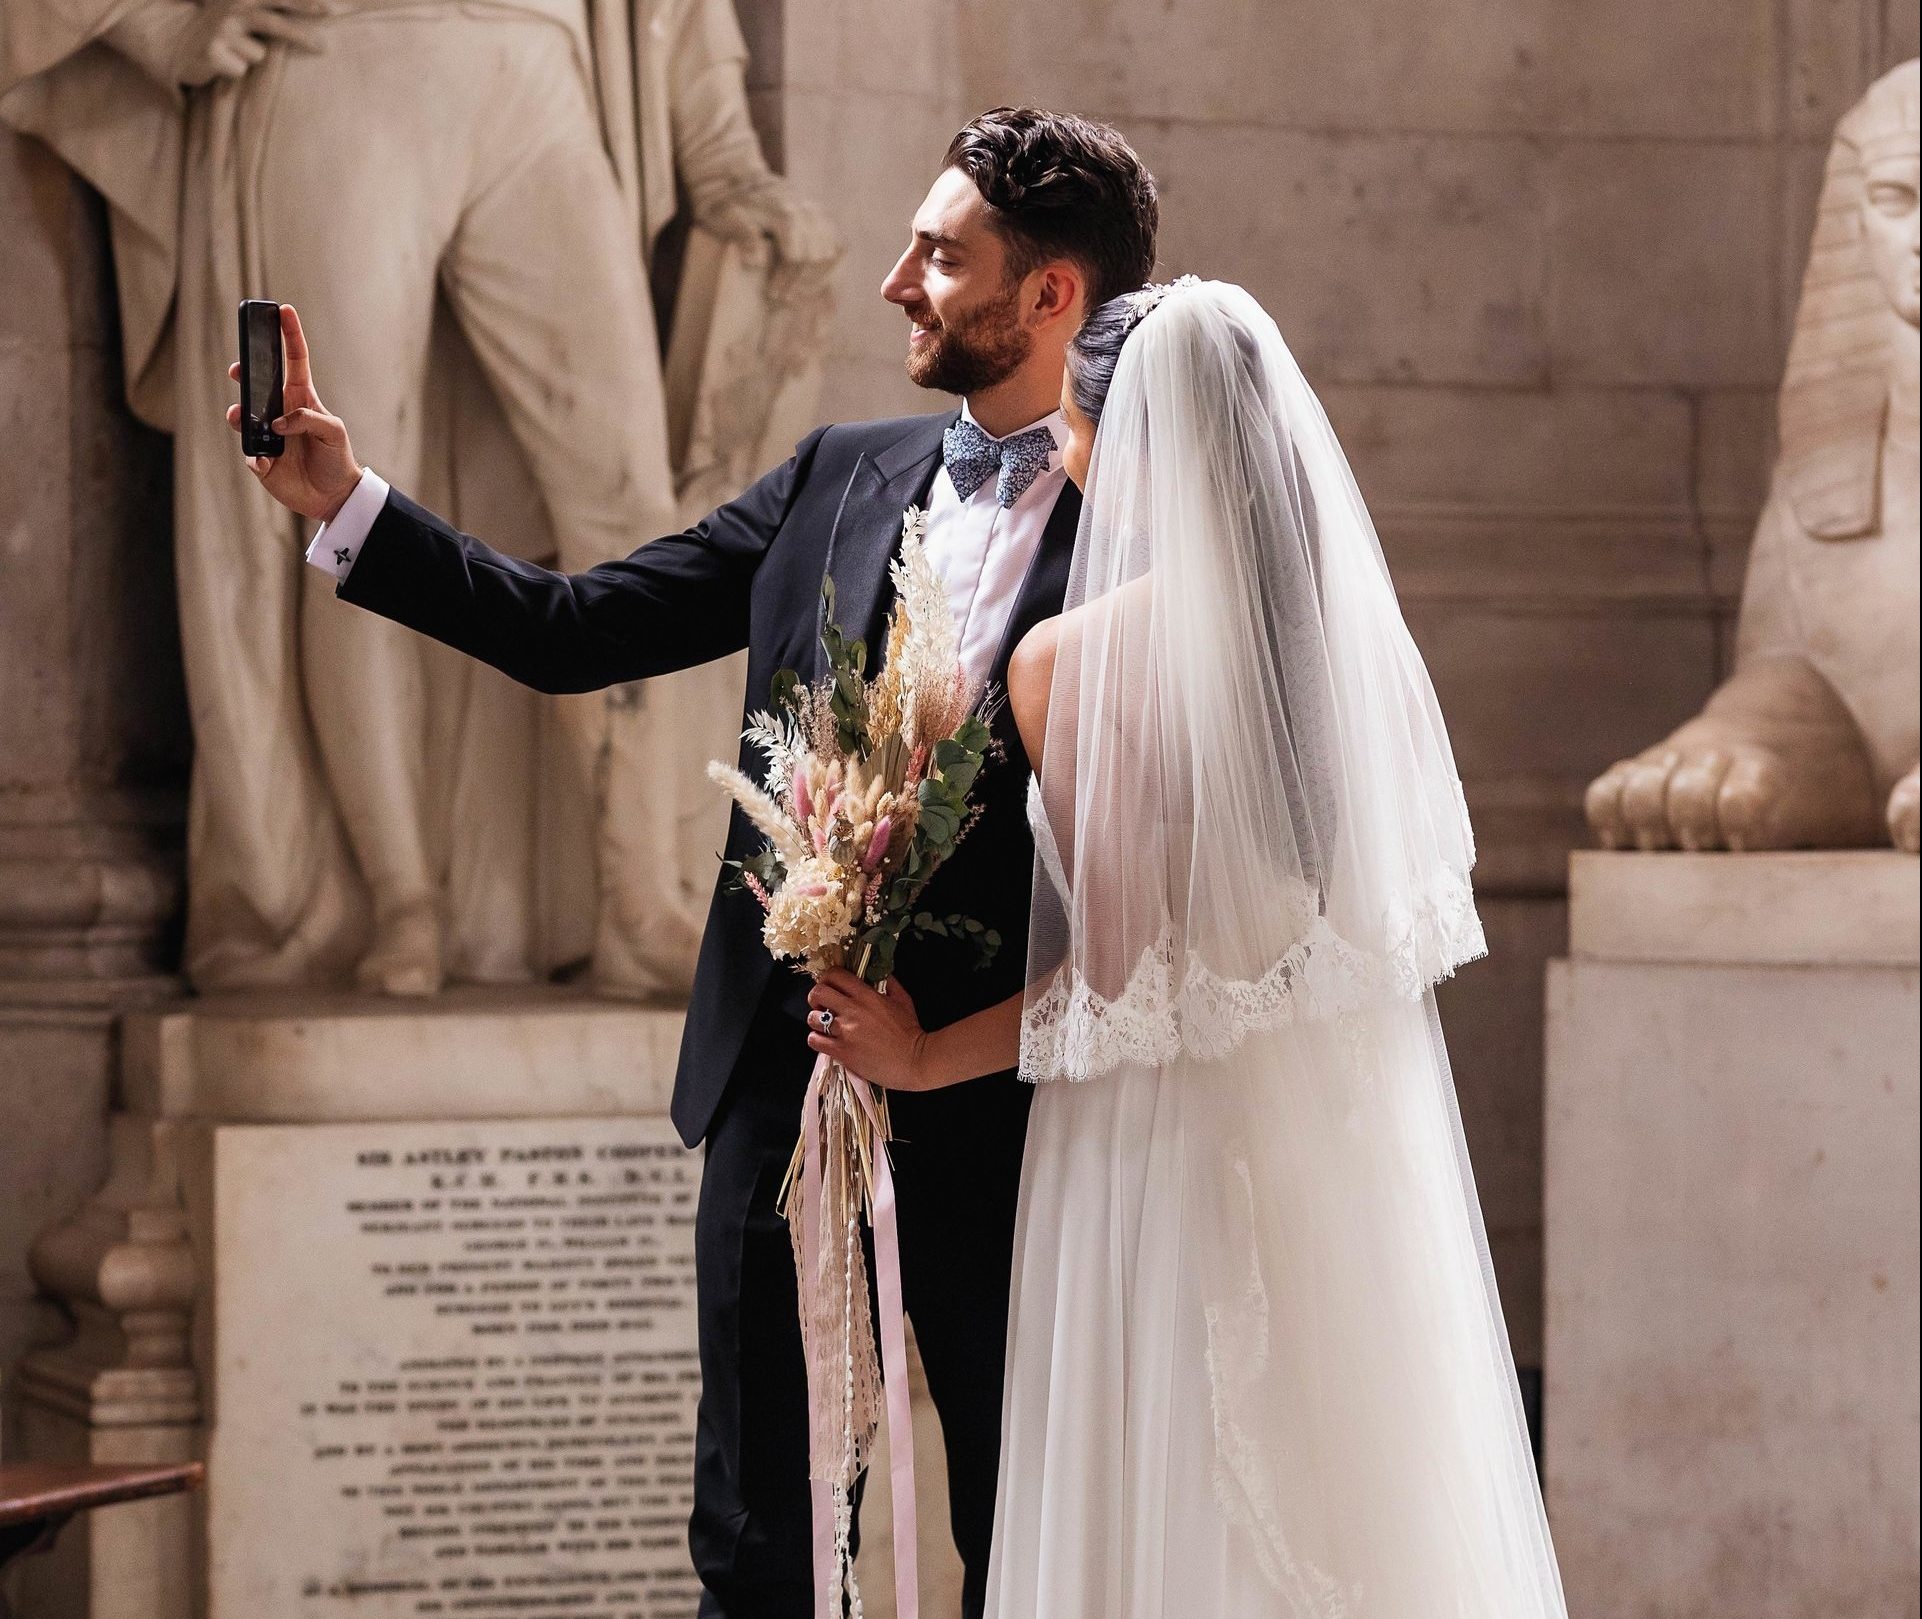 They were one of 30 couples to marry at St Paul's Cathedral in 2022. 